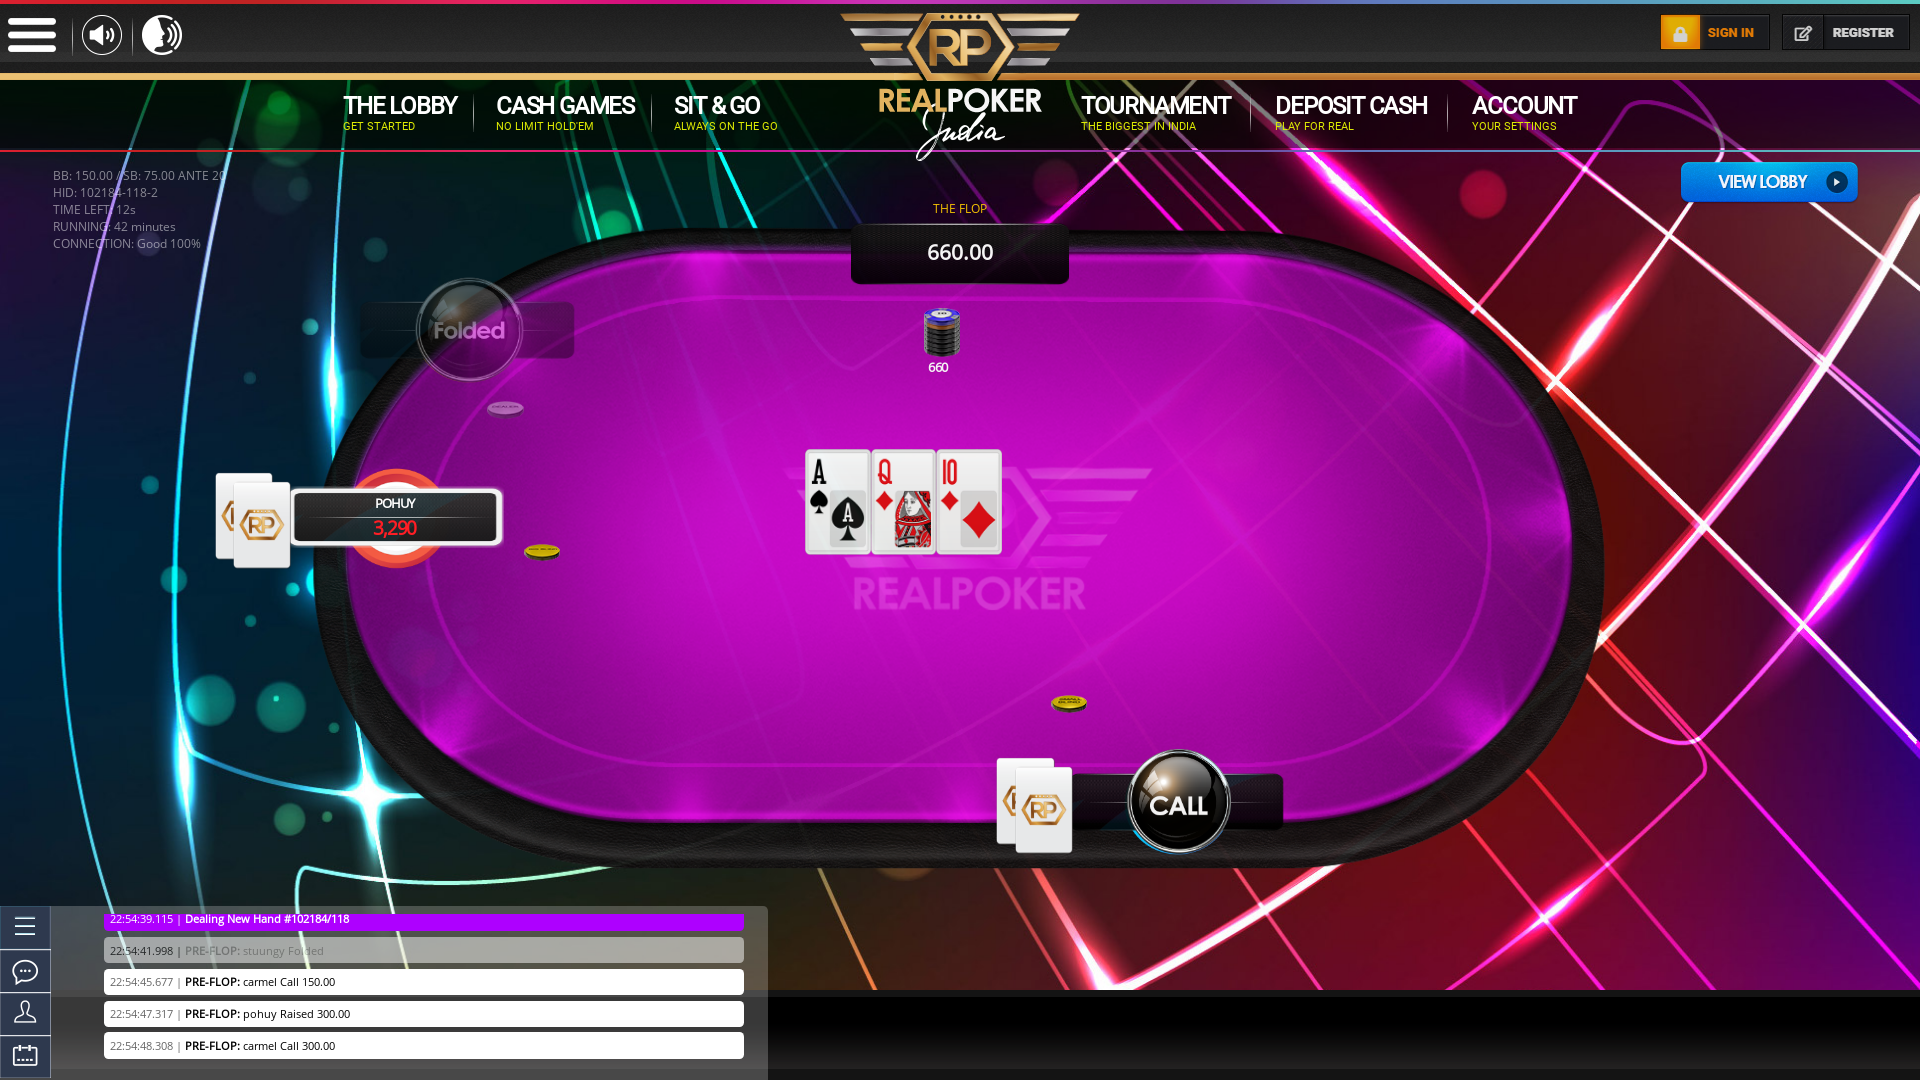 Indian poker on a 10 player table in the 42nd minute